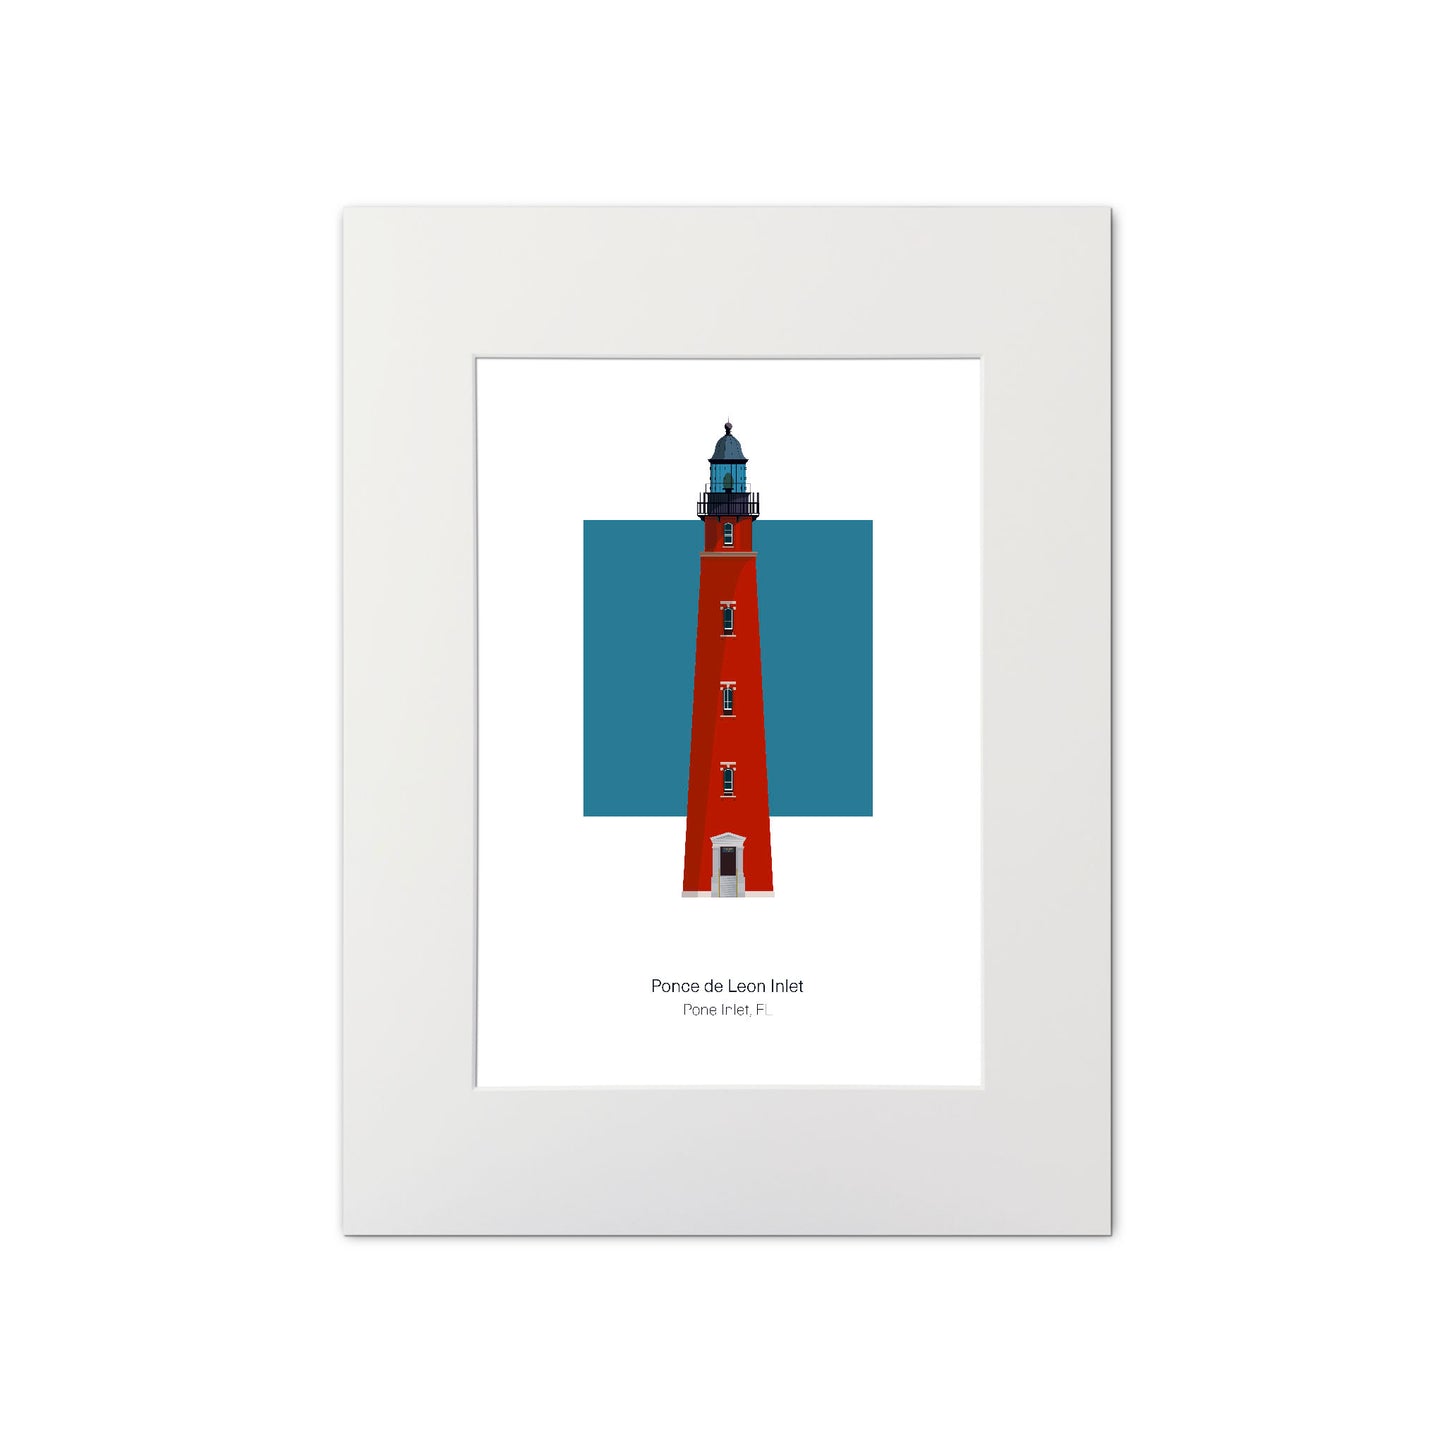 Illustration of the Ponce de Leon Inlet lighthouse, Florida, USA. On a white background with aqua blue square as a backdrop., mounted and measuring 11"x14" (30x40cm).